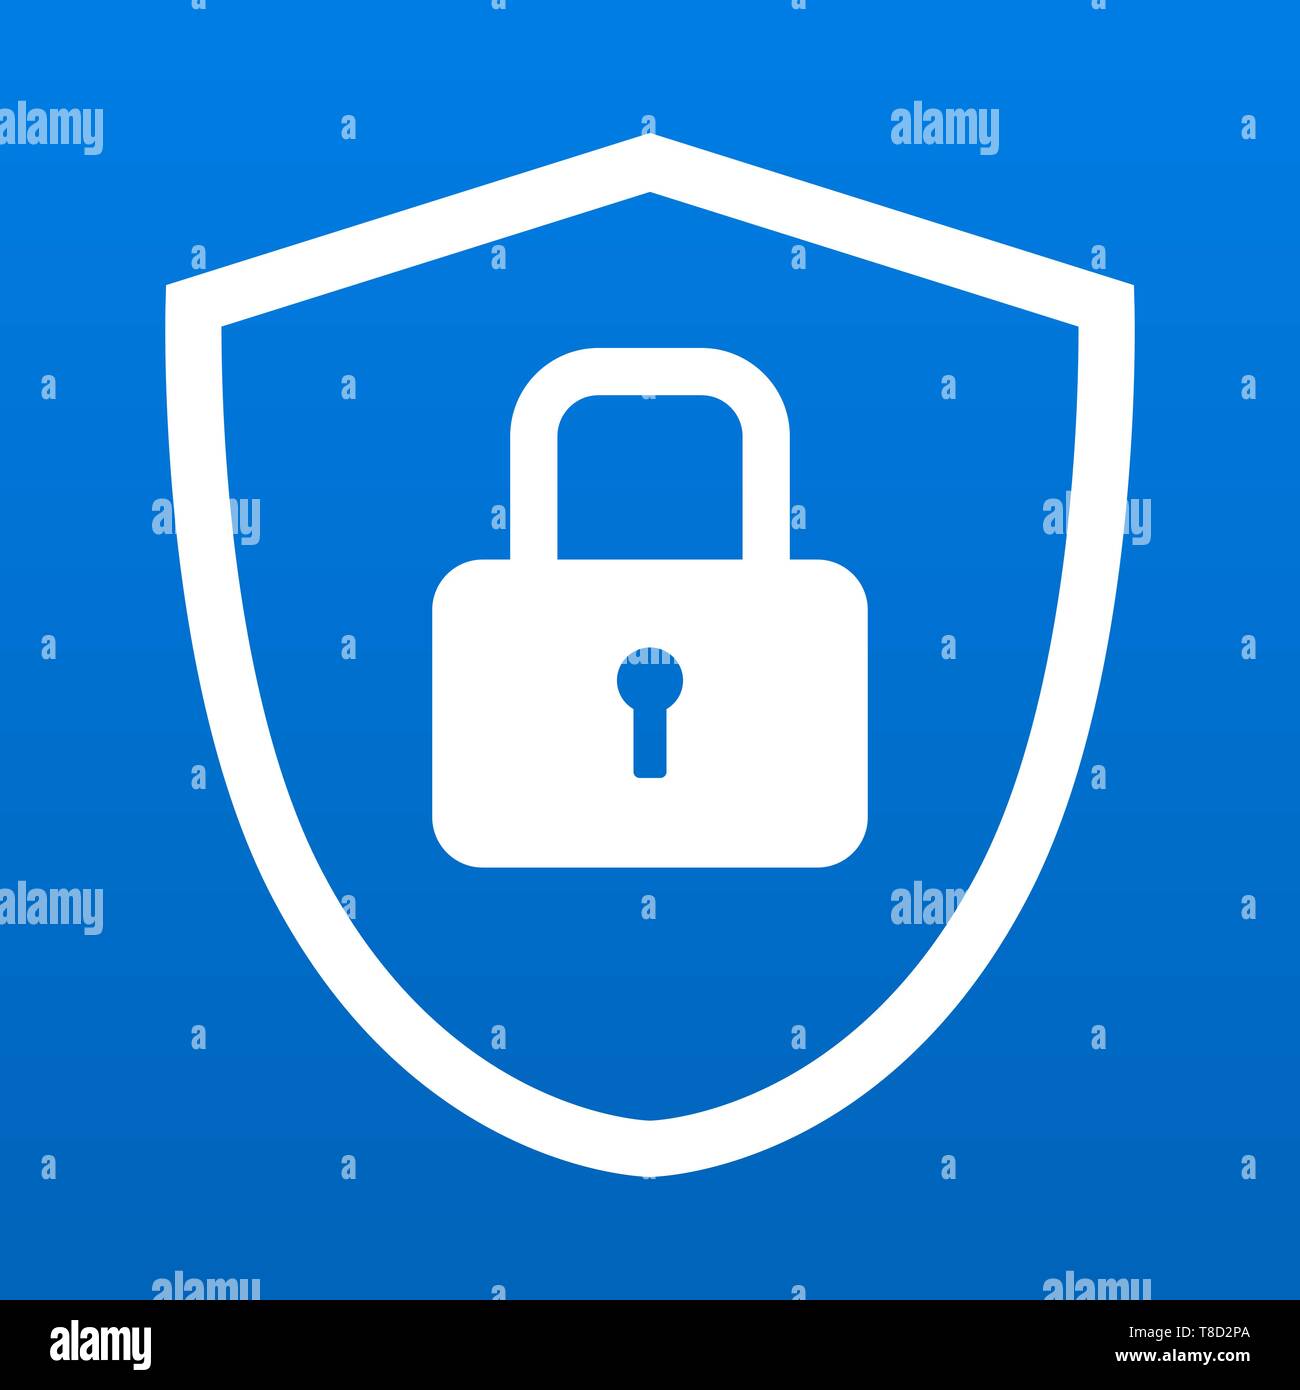 Shield icon symbol with security lock for safety and protection vector illustration Stock Vector